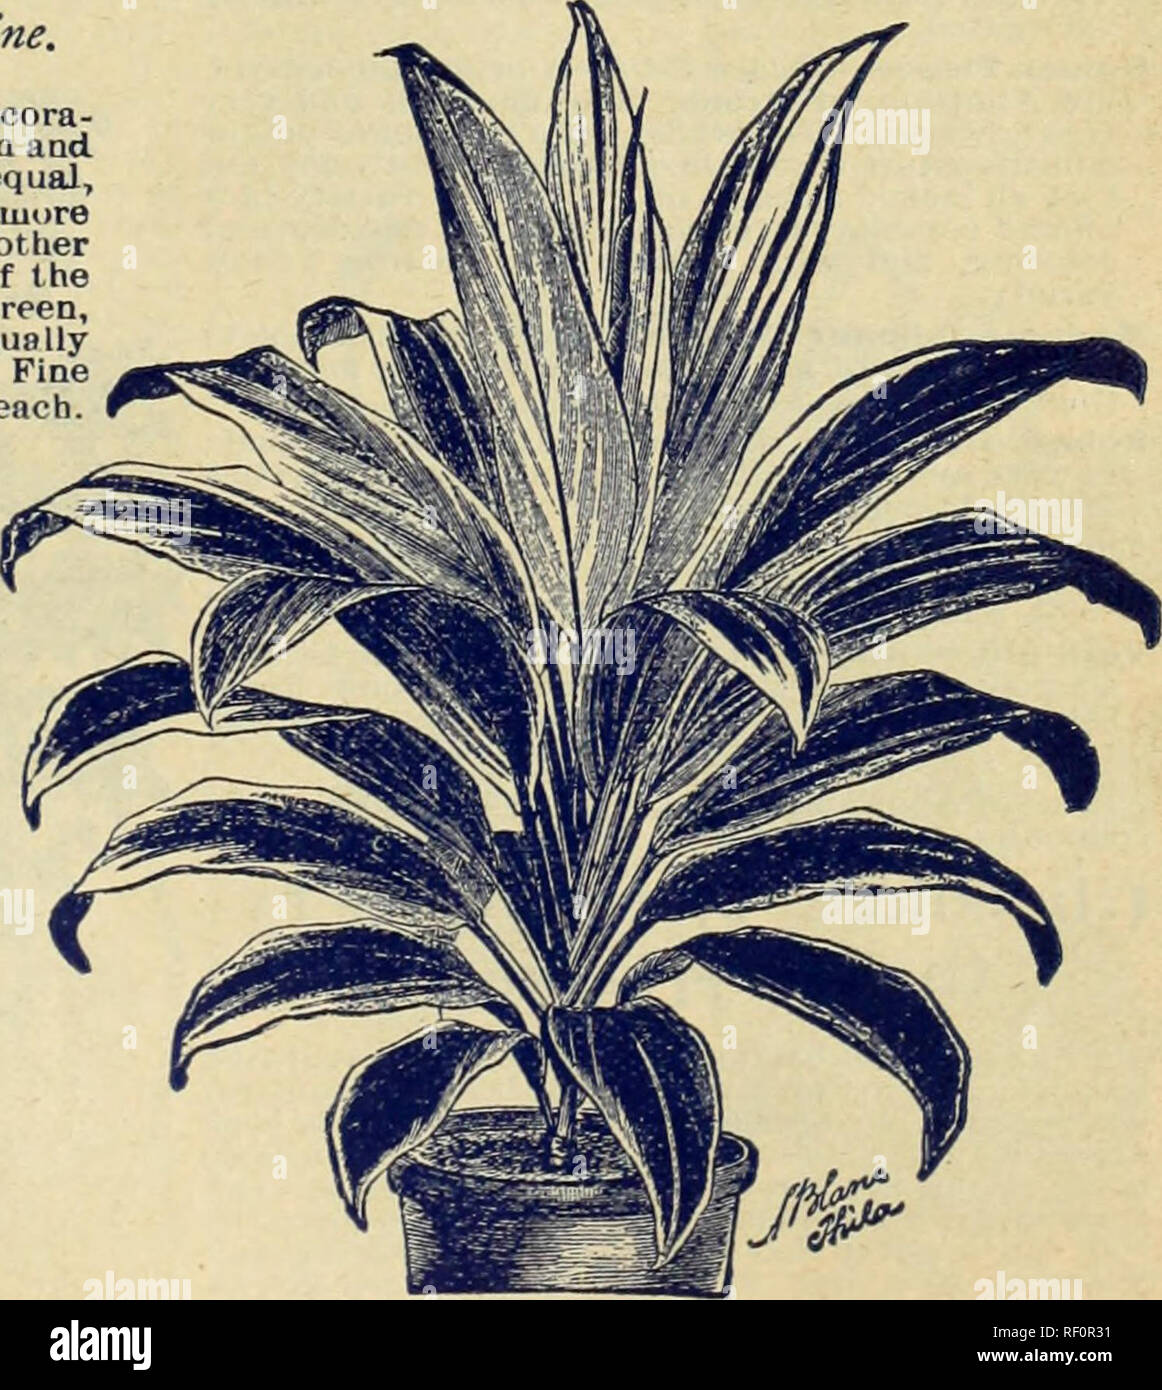 . Catalogue of rare Florida flowers and fruits : season of 1893. Nurseries (Horticulture) Florida Catalogs; Flowers Catalogs; Plants, Ornamental Catalogs. PANDANUS DTILIS. Gooptie, OP X^n^i^ iPt^^&quot; rifolia. This strikingly beautiful and interesting Cycad, a native of the extreme southern part of this state, is something between a Palm and a Fern, but is neither, and is of extreme stateliness and beauty. The leaves are pinnate and Palm-like, but coiled in the bud like Ferns, and retain their beauty for some years. The beautiful and interesting flower-head is like a pine cone in shape, appe Stock Photo